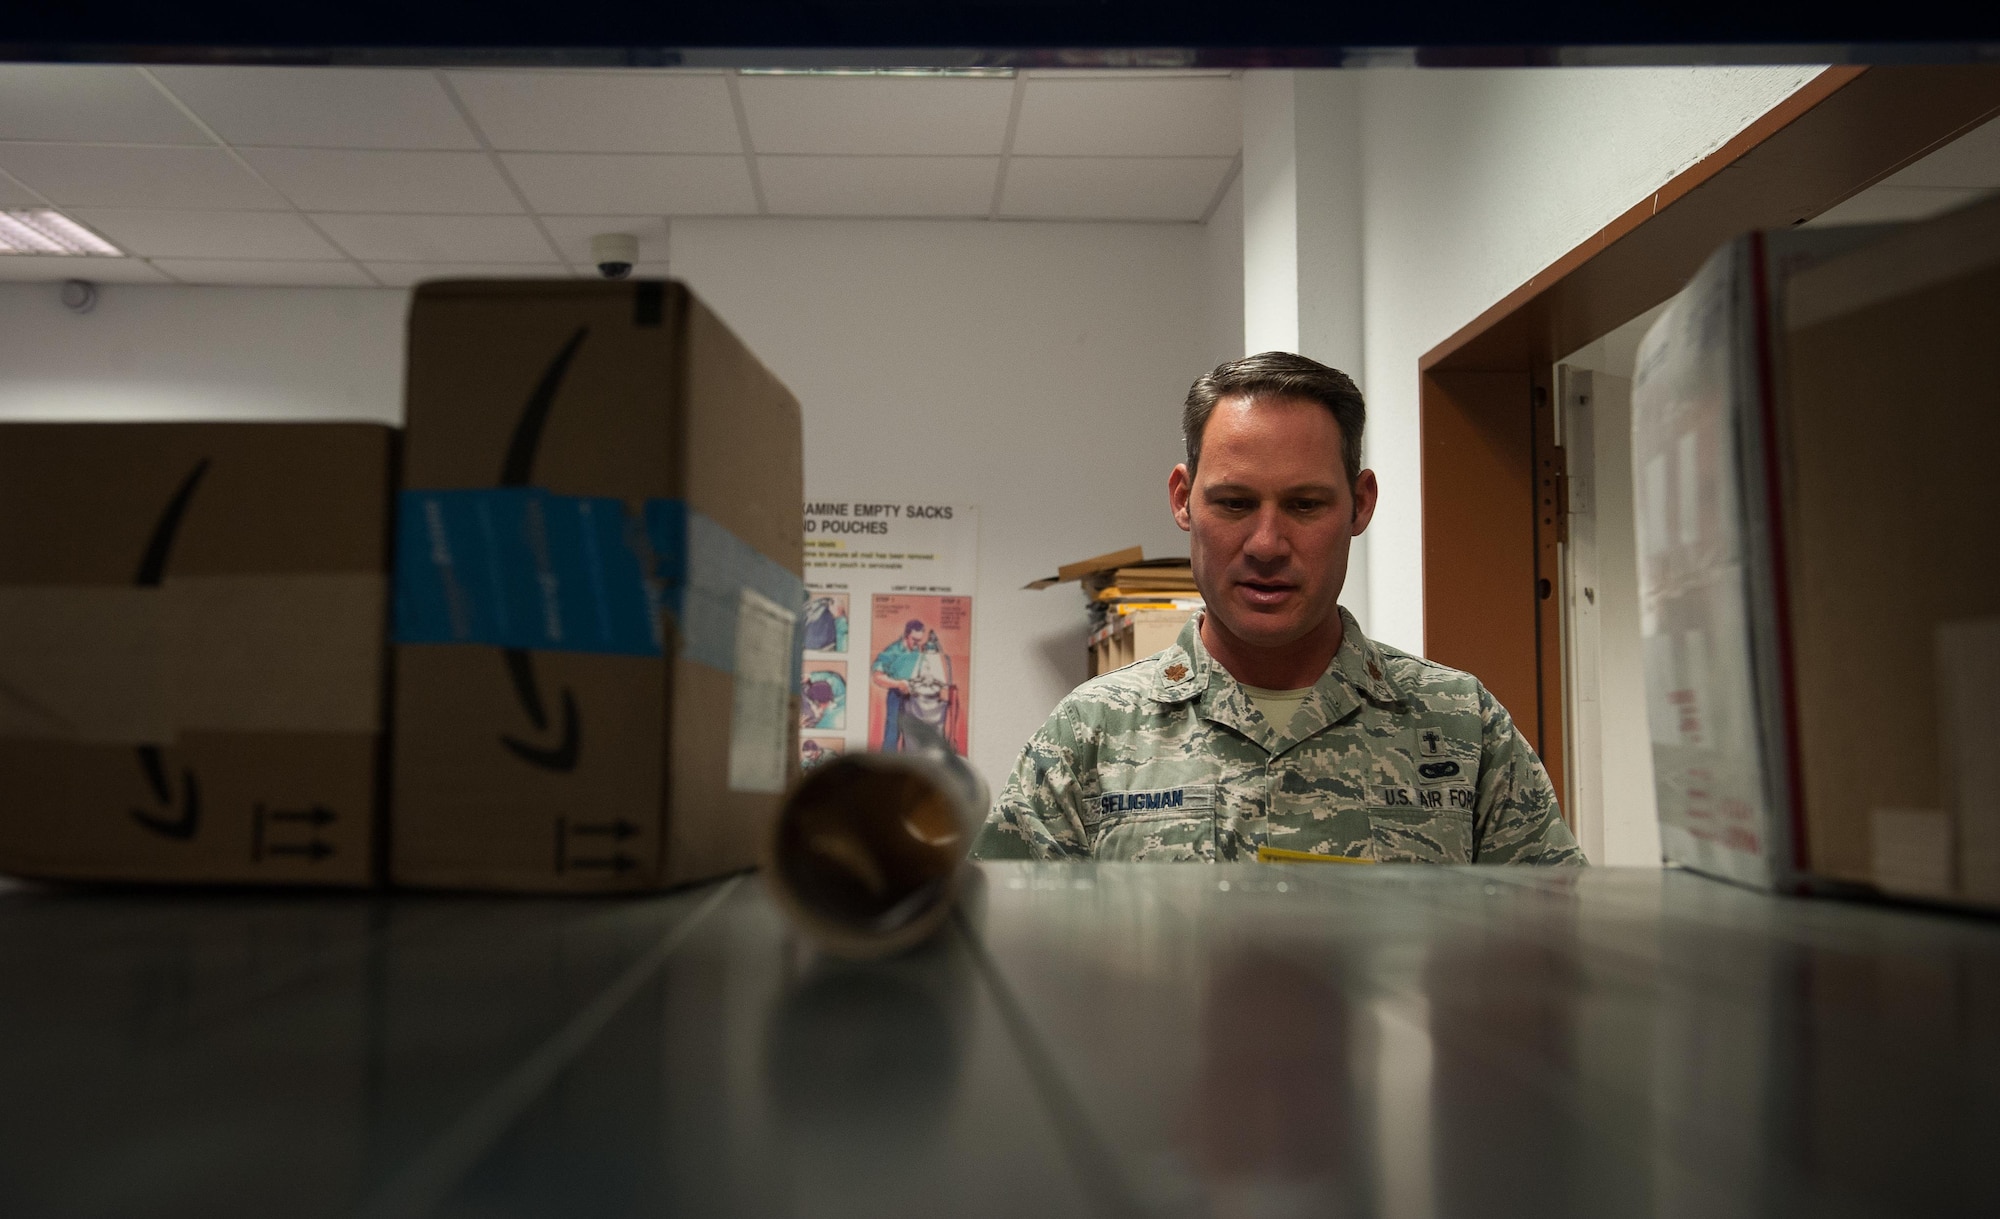 Maj. Chuck Seligman, 86th Airlift Wing chapel branch chief, helps postal specialists at the Northside Post Office at Ramstein Air Base, Germany, Dec. 8, 2016. Volunteer opportunities arise across the Kaiserslautern Military Community constantly, and some venues to reach out to the local communities in need are the United Service Organizations, located at the Ramstein Passenger Terminal, or the chapel.  (U.S. Air Force photo by Airman 1st Class Lane T. Plummer)